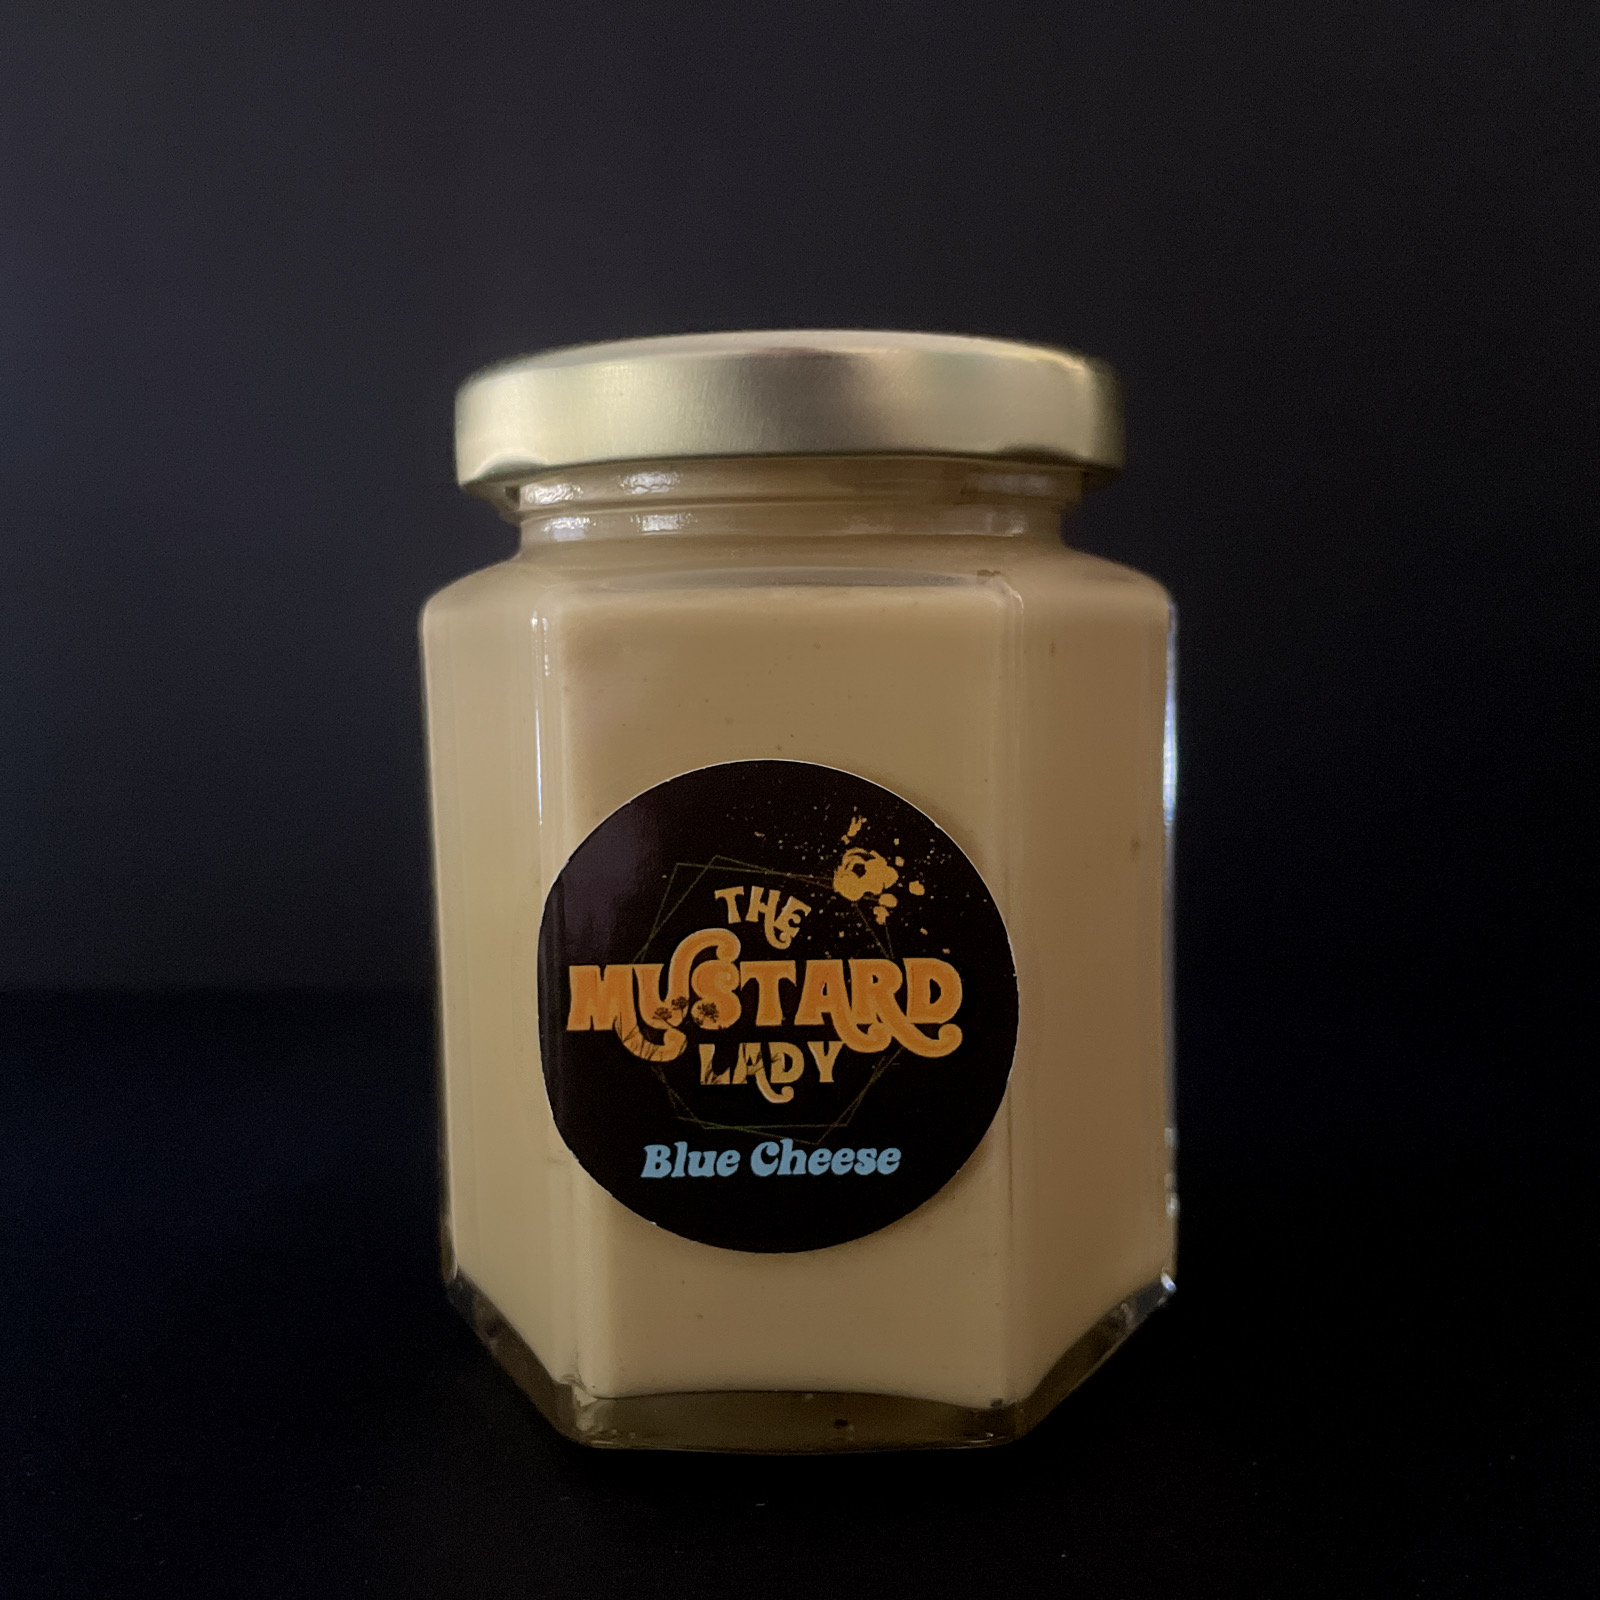 The Mustard Lady: Blue Cheese